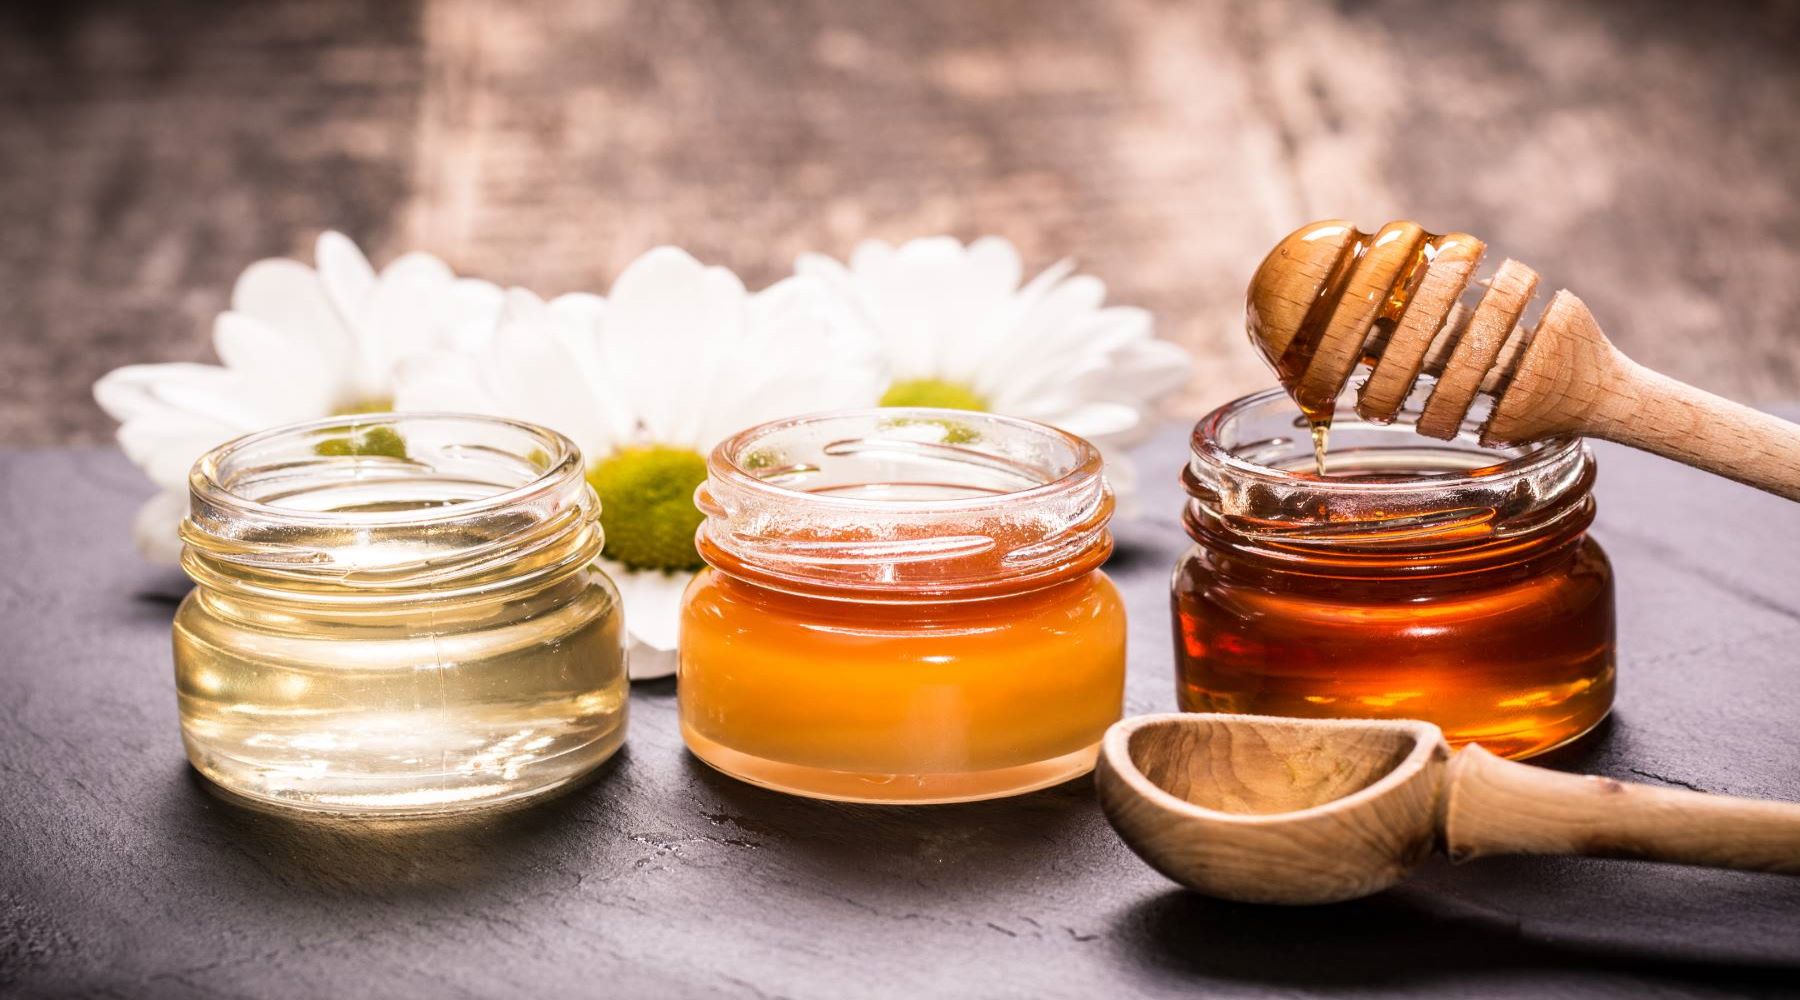 MGO and UMF Honey for medicinal use and well-being